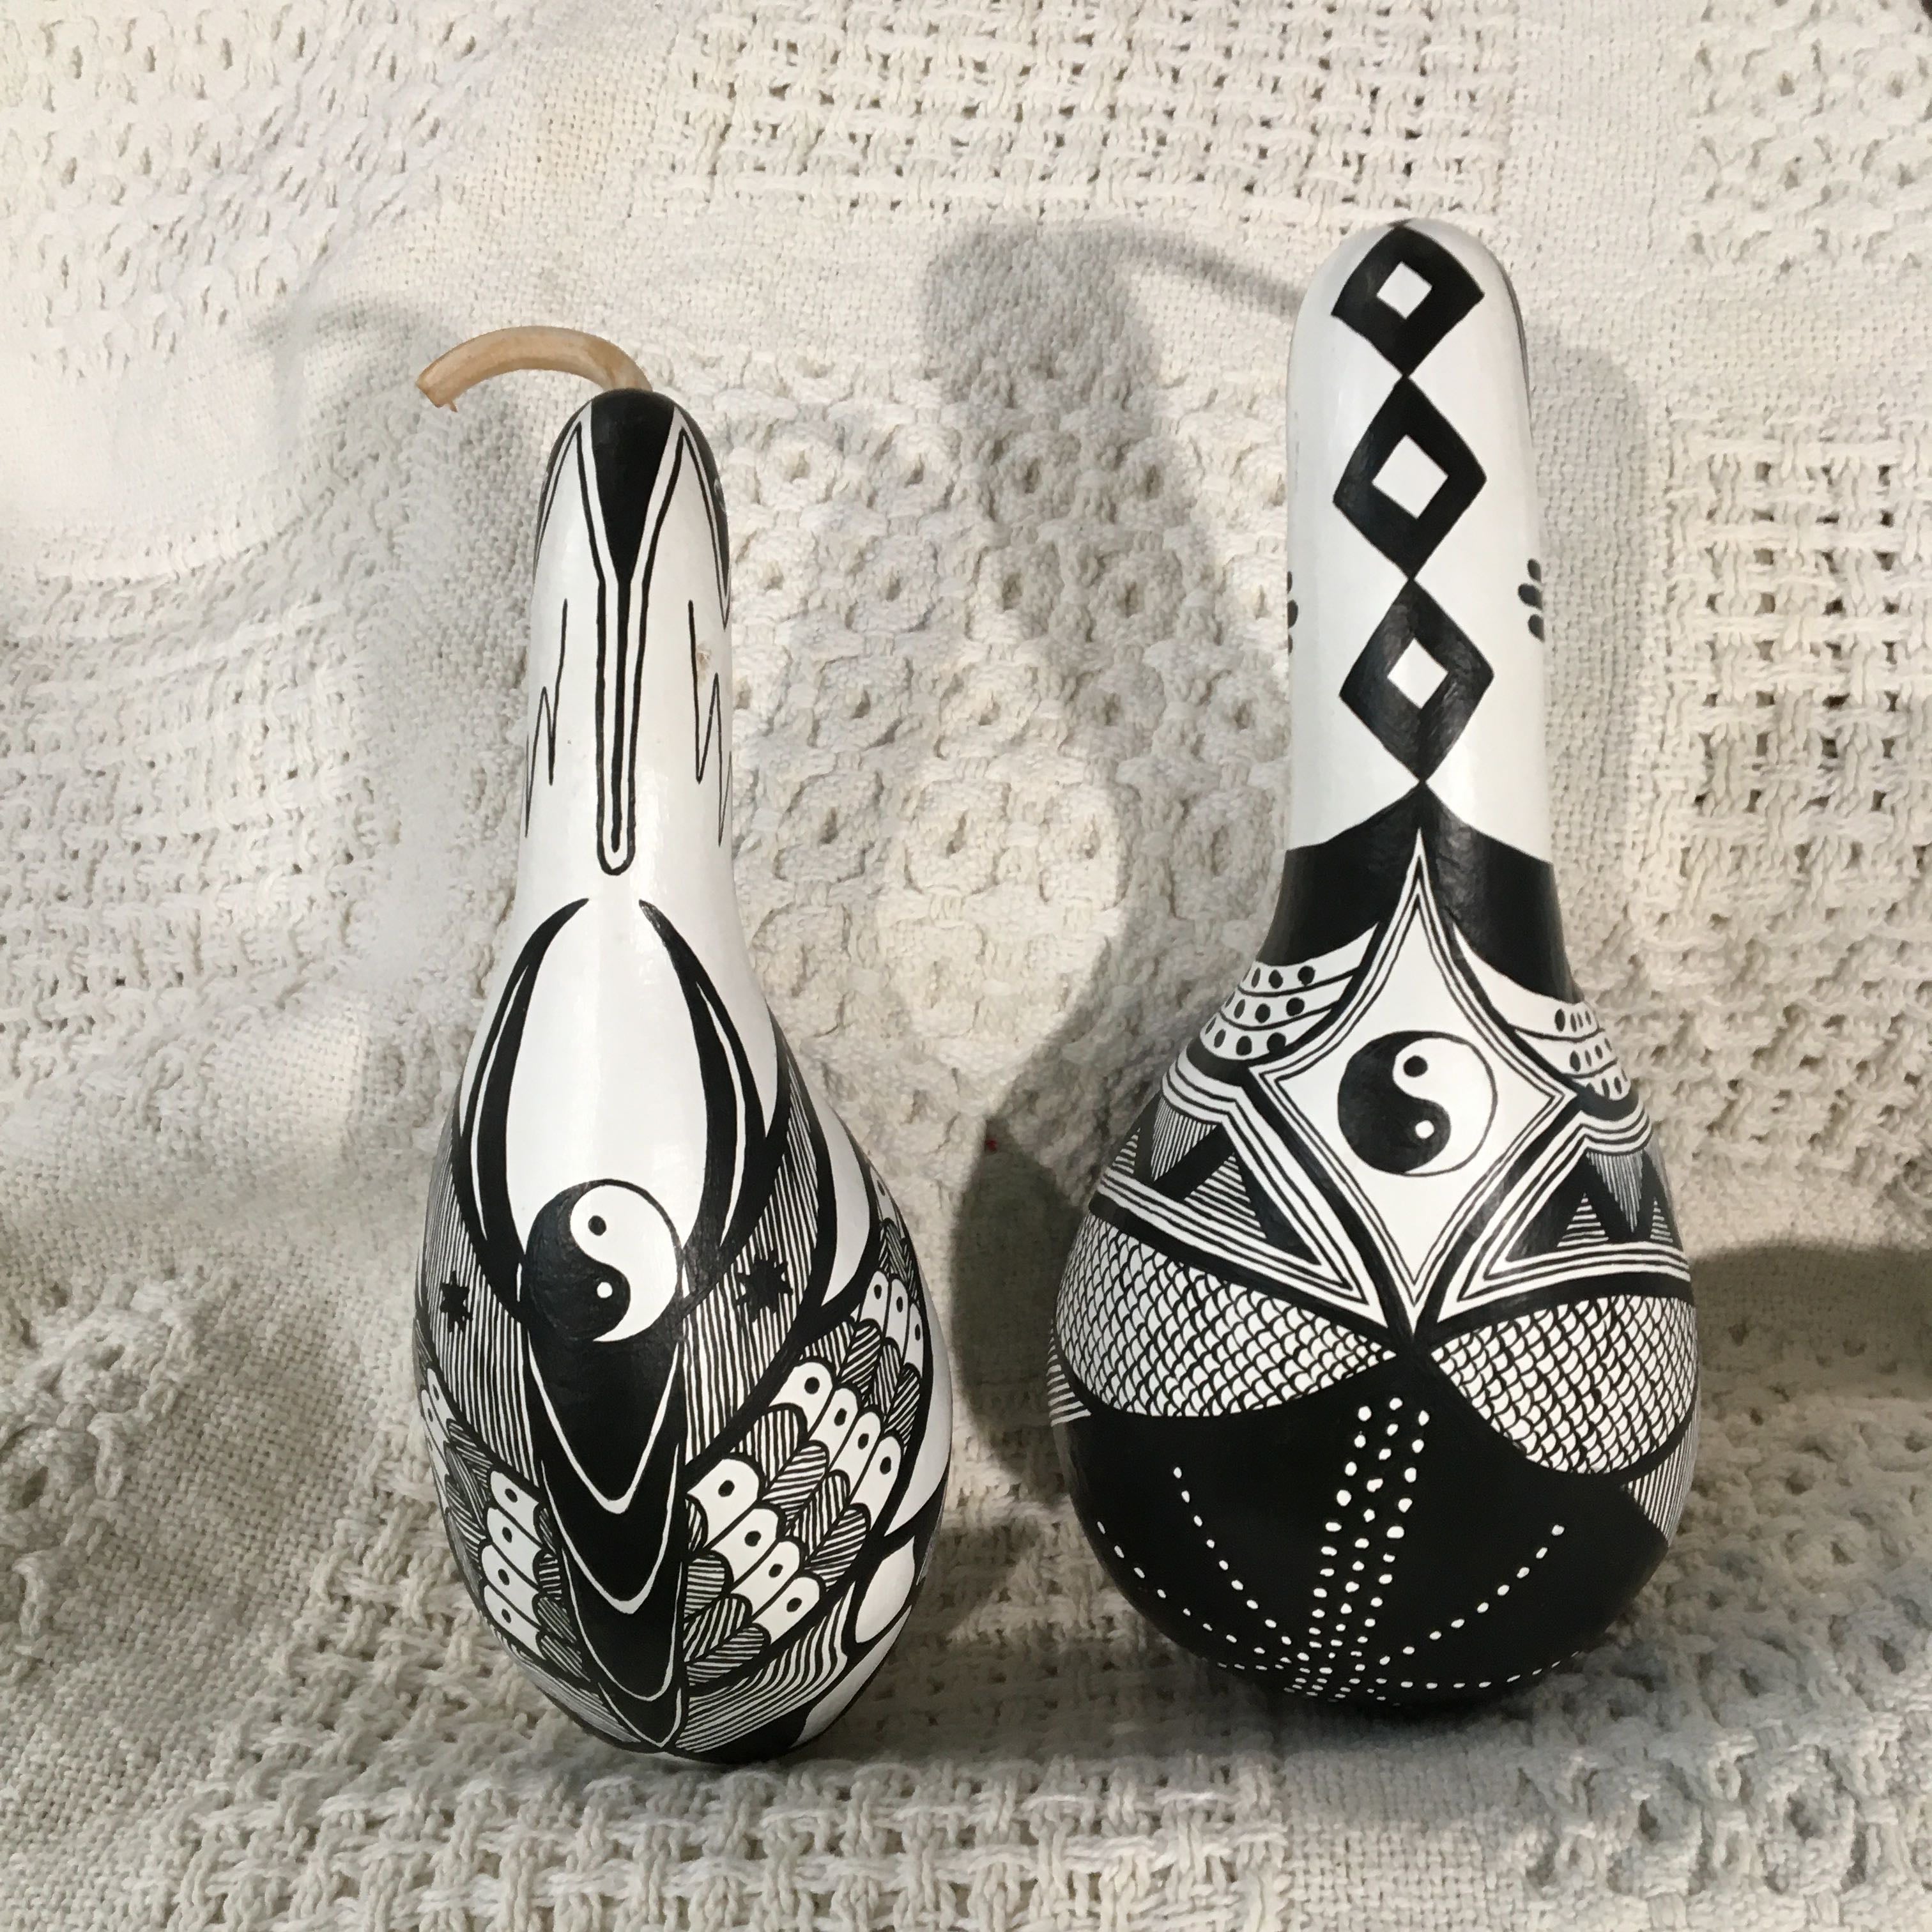 Set of 2 Kay VanDervoort Hand Painted Yin Yang Gourds Home Decor